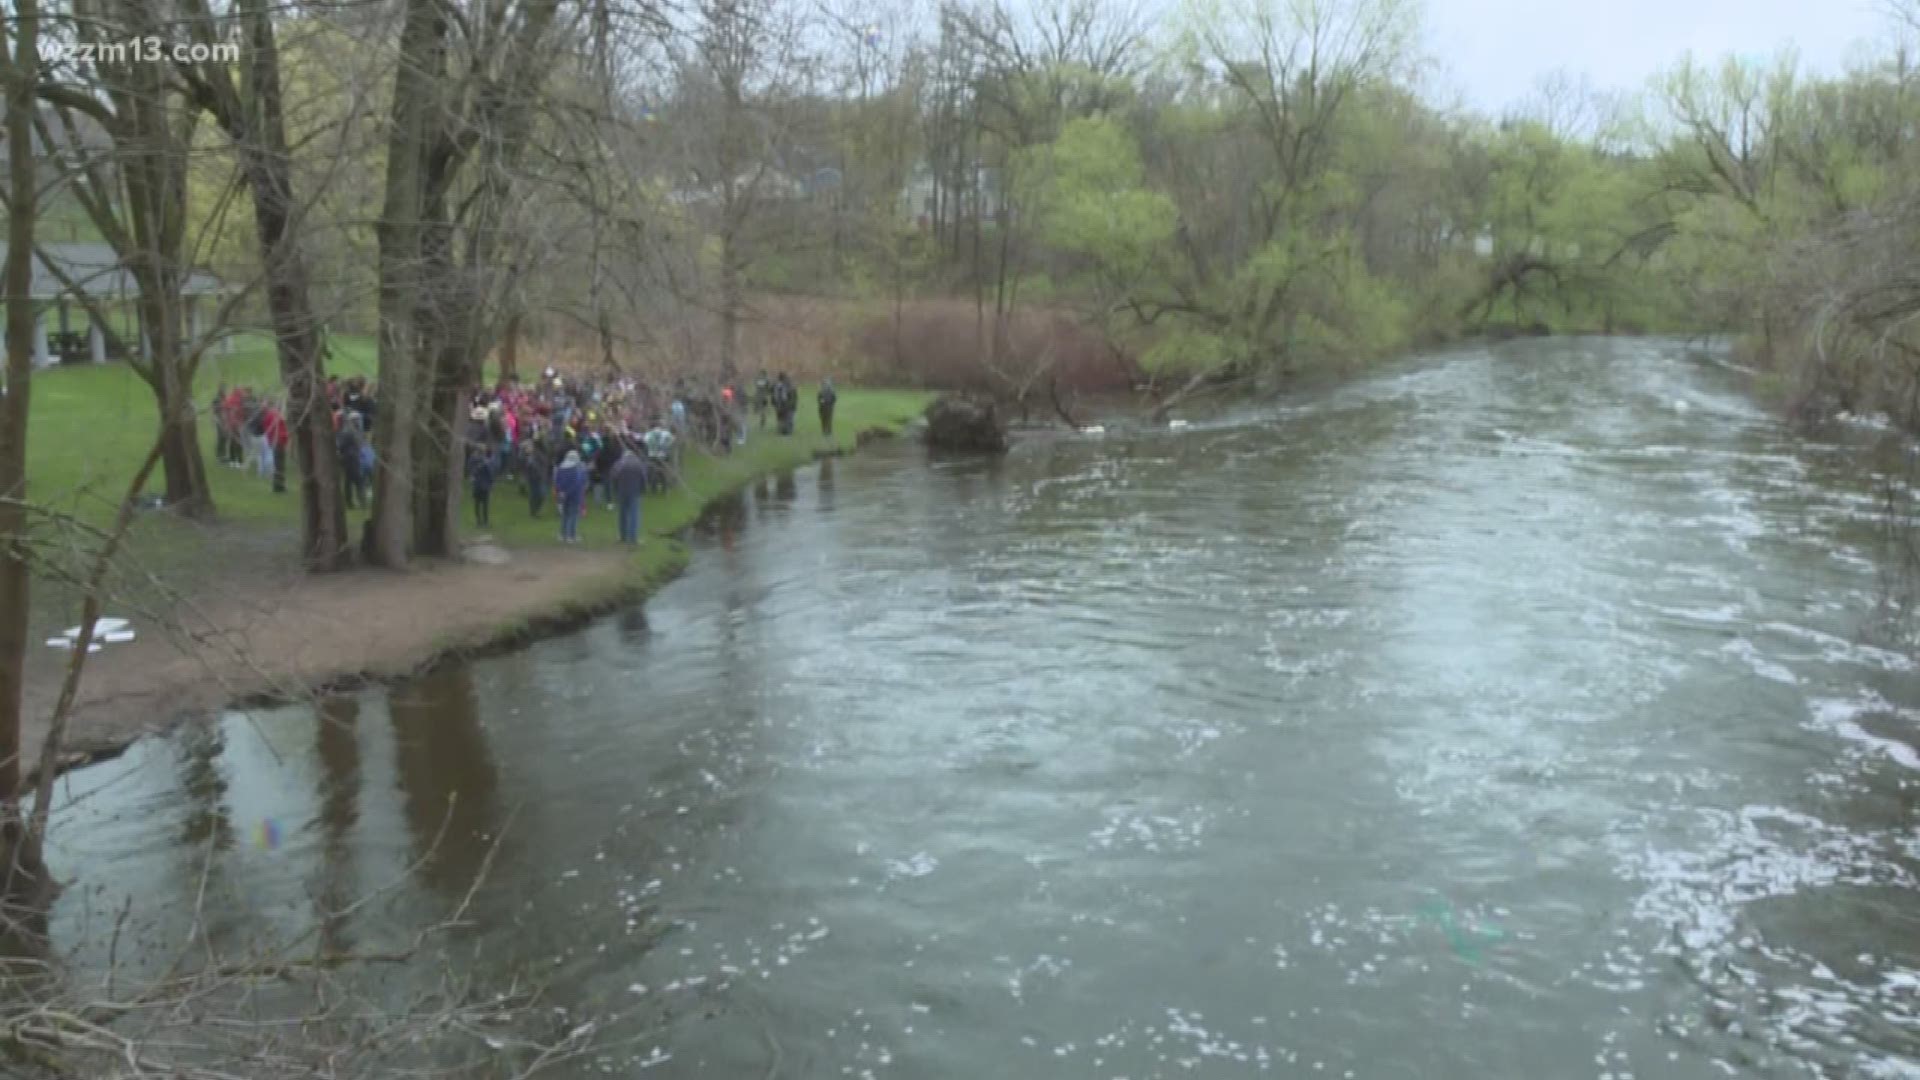 Friday morning, more than 100 students from Northview Public Schools released about 50 salmon into the Rogue River.